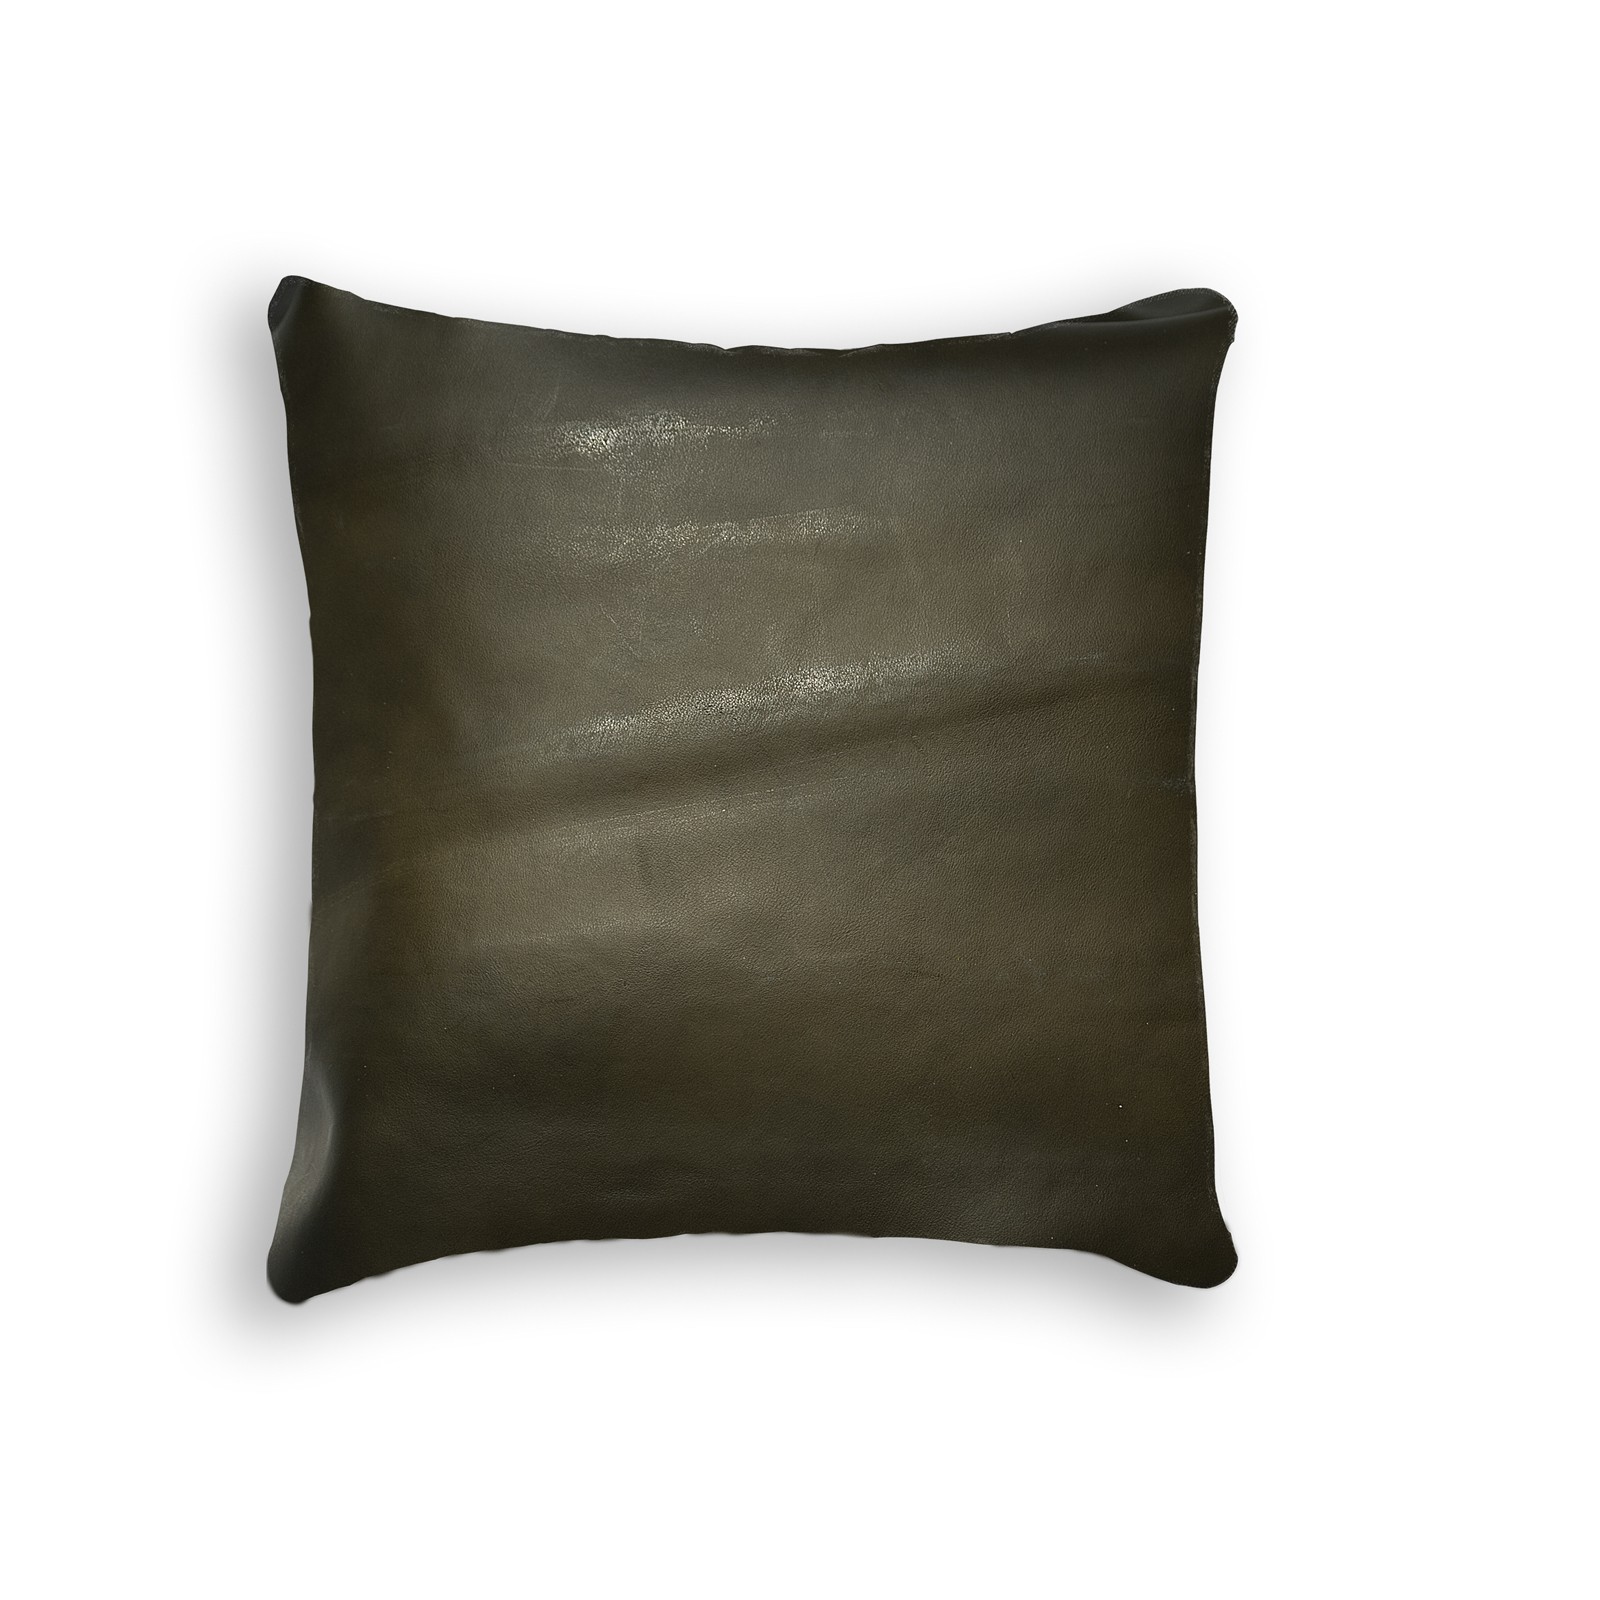 16" x 16" x 5" Chocolate Cowhide Leather Pillow